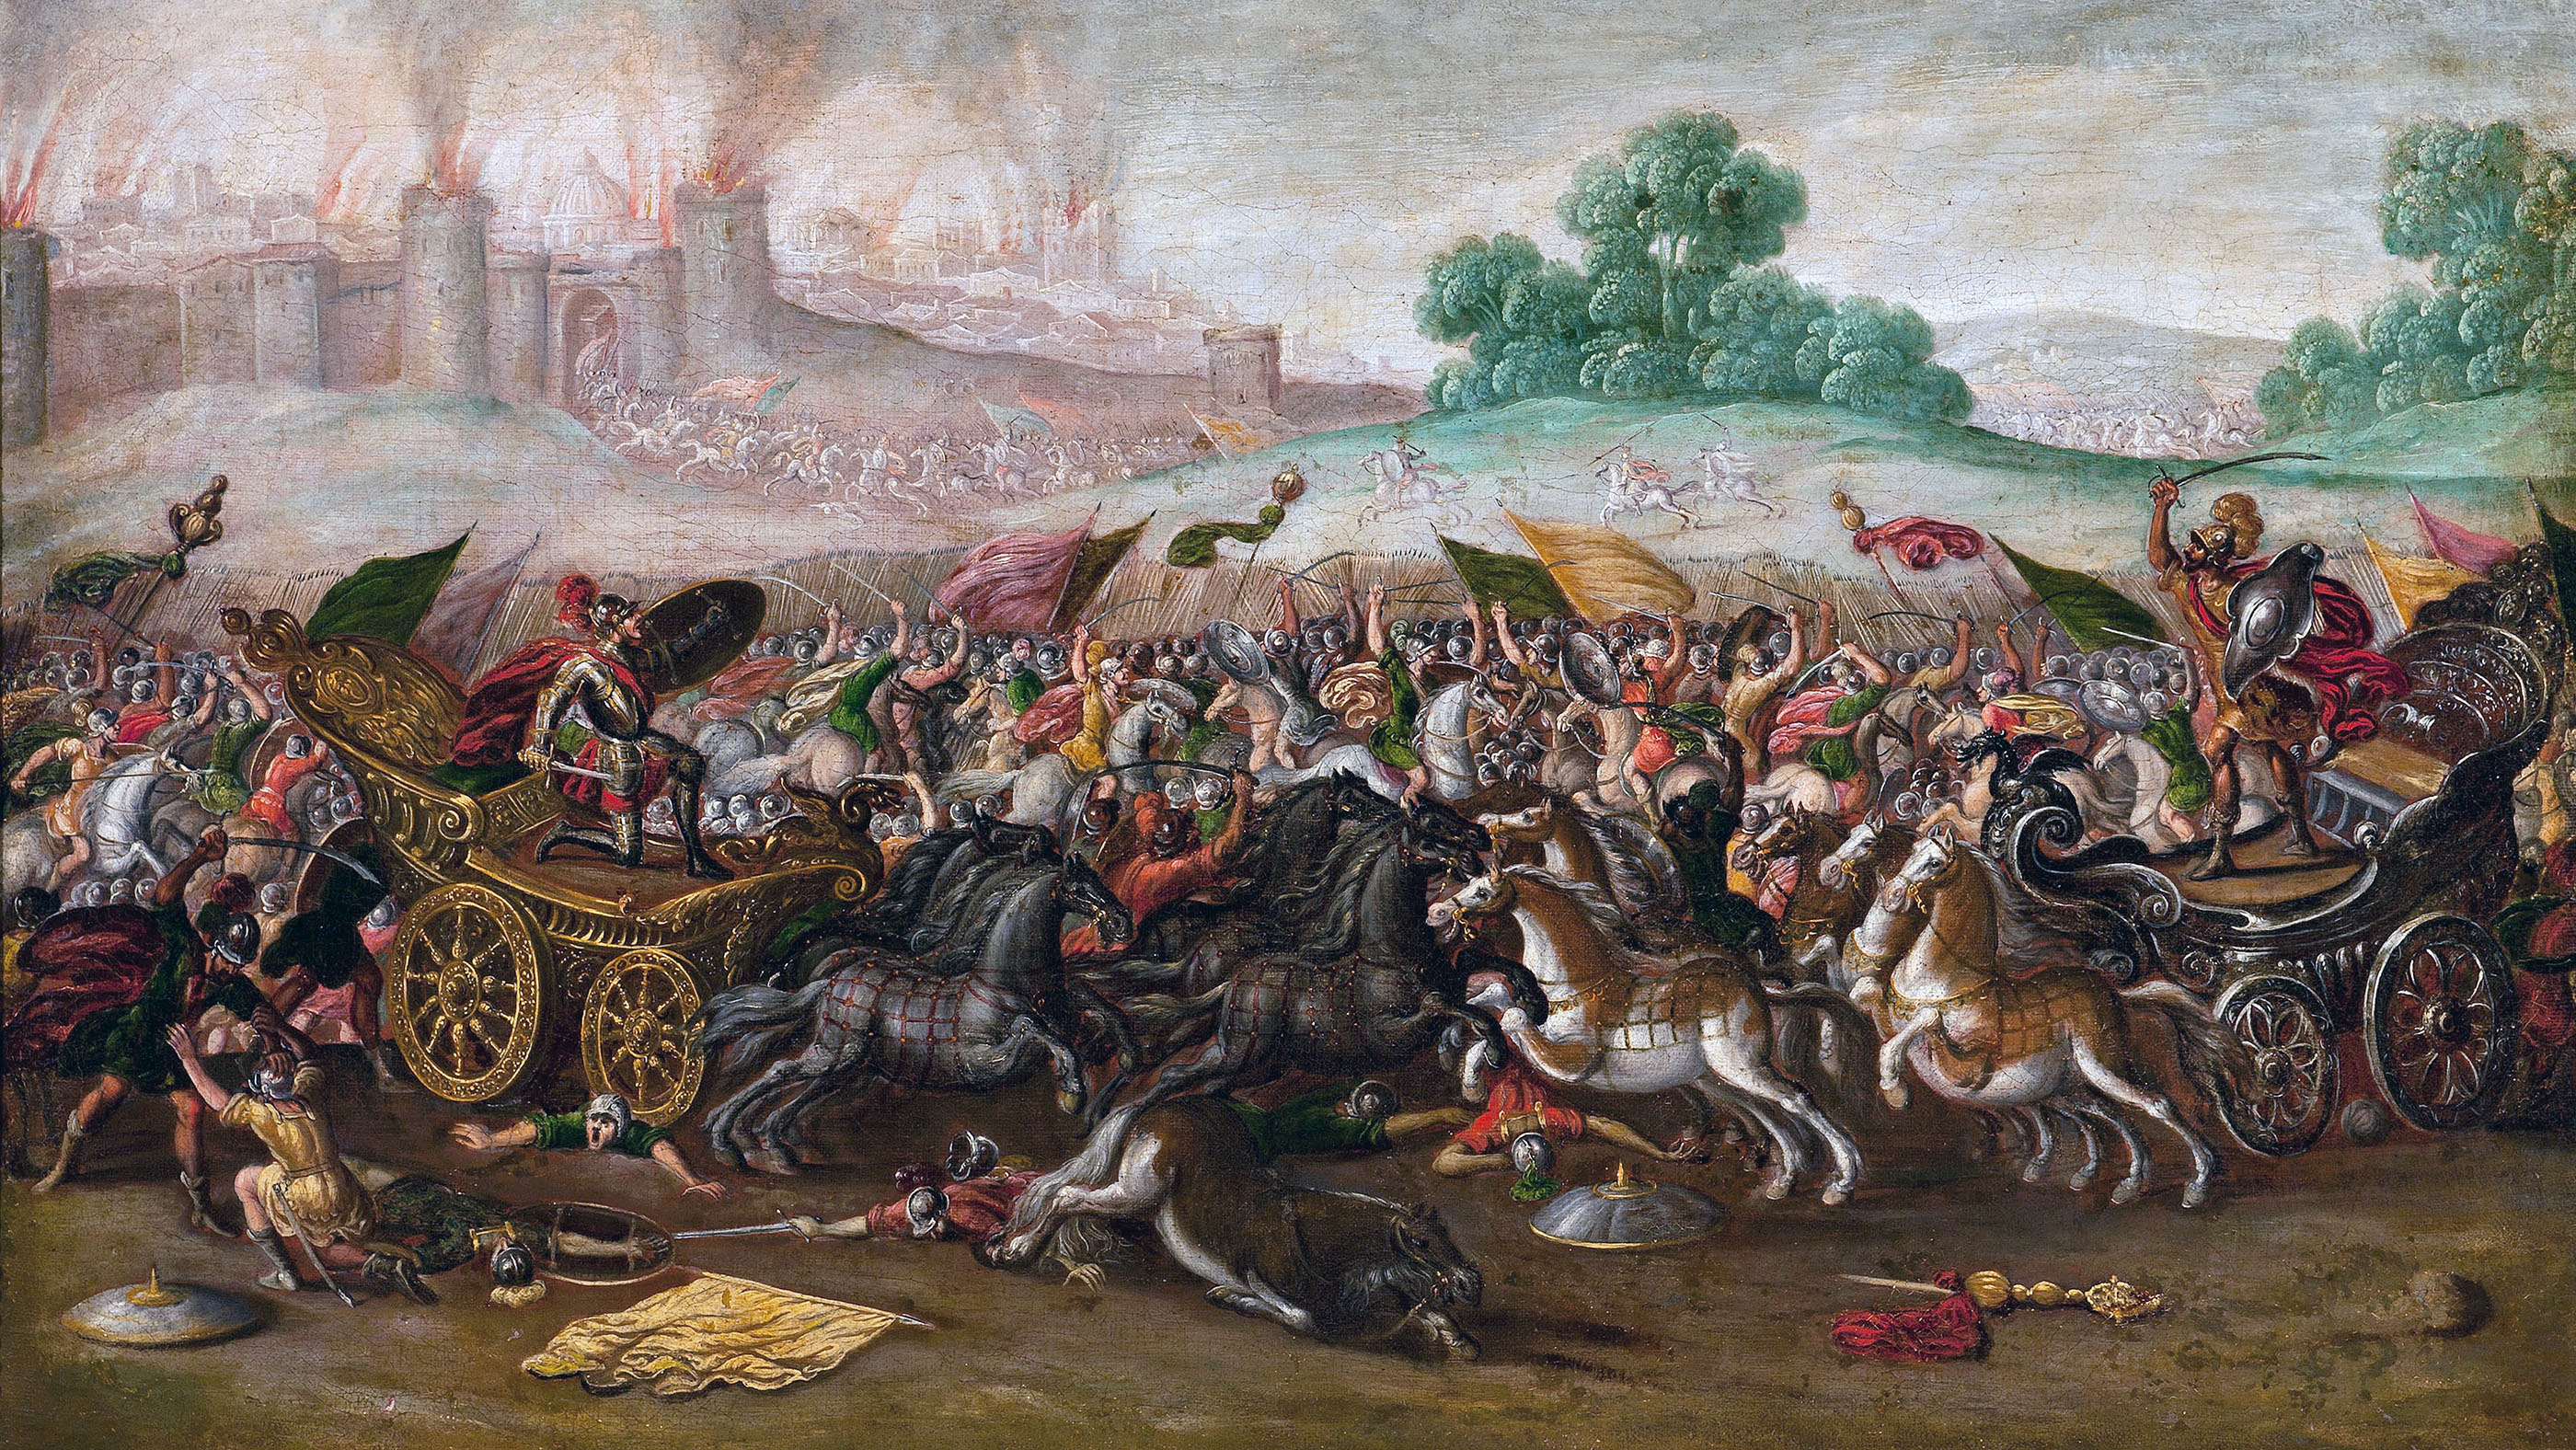 A painting showing the burning of Jerusalem by King Nebuchadnezzar's Army.